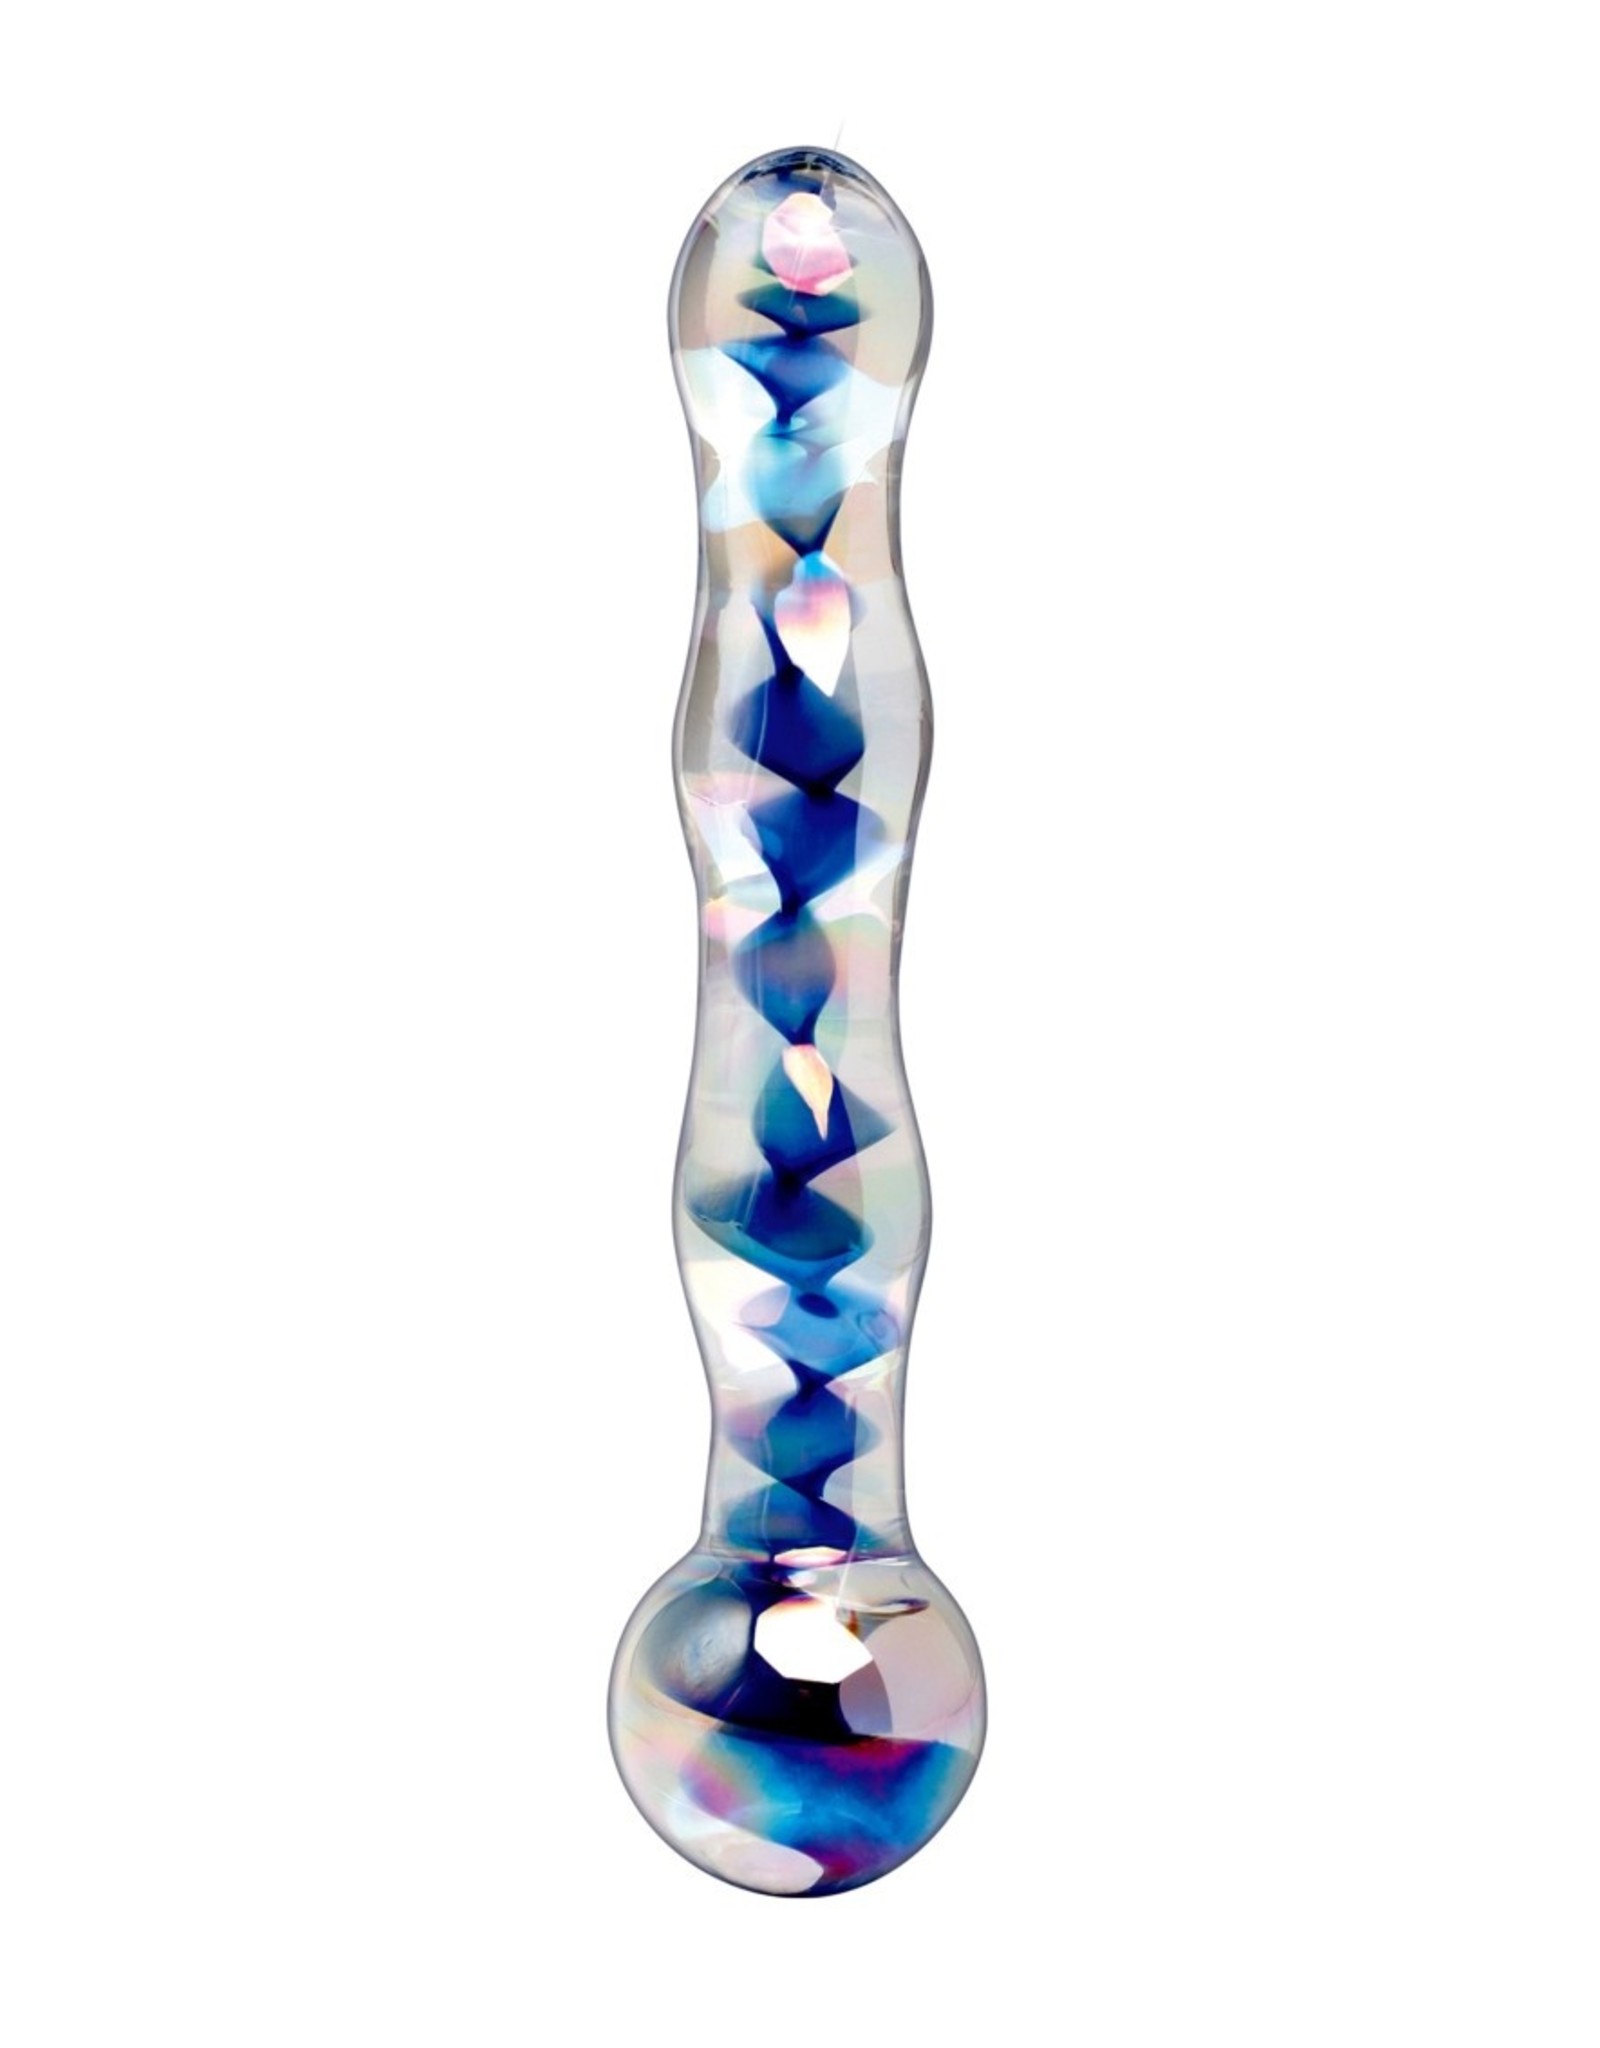 Icicles Icicles No08 Glass Massager